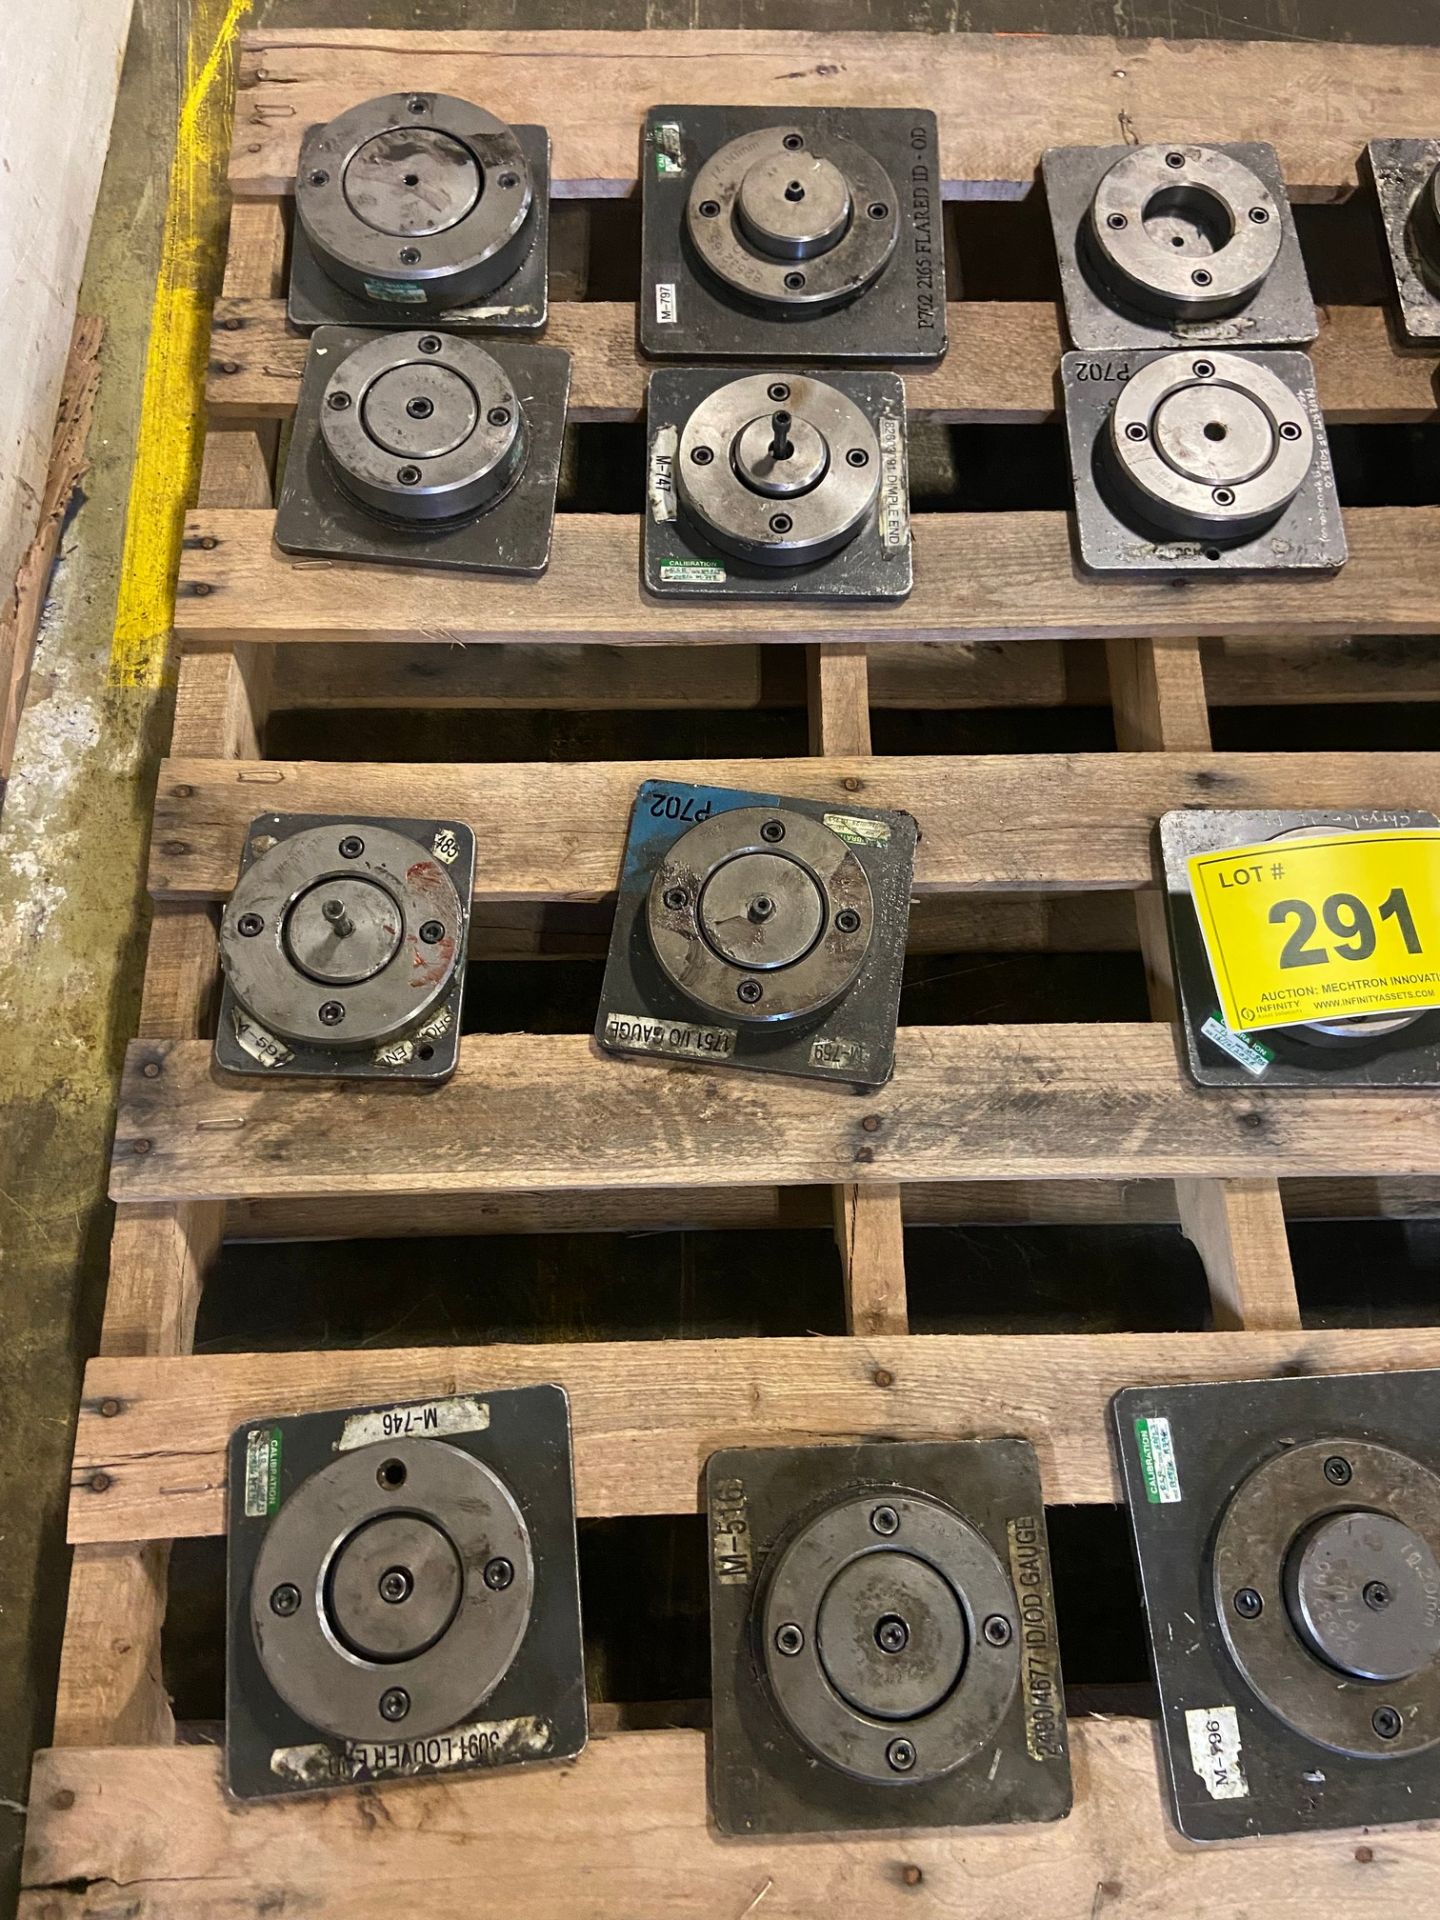 PALLET OF ID/OD GAUGES & ASSORTED TOOLING - Image 2 of 3